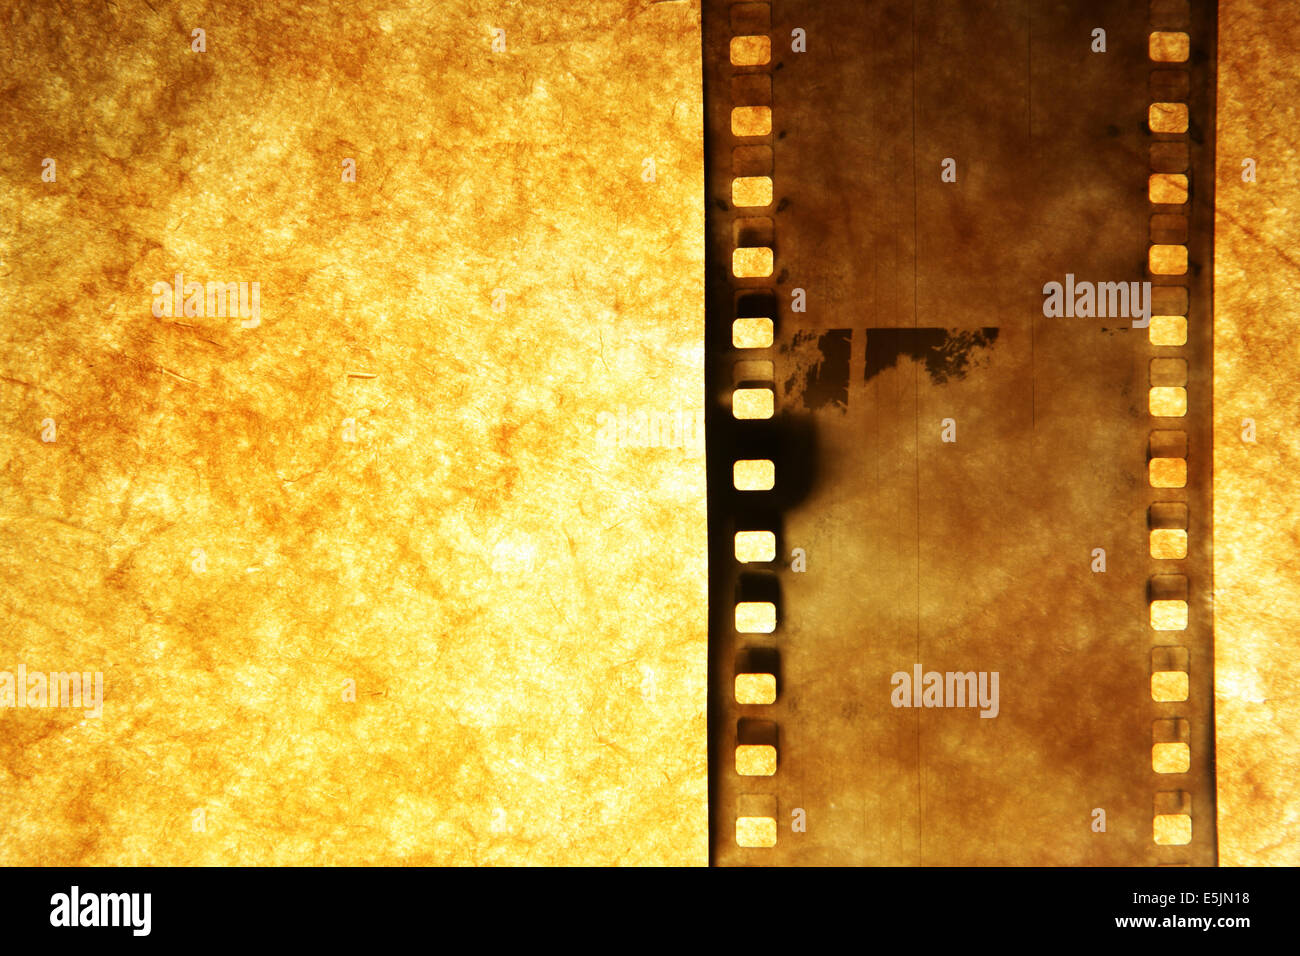 Old film strip over grunge paper background Stock Photo